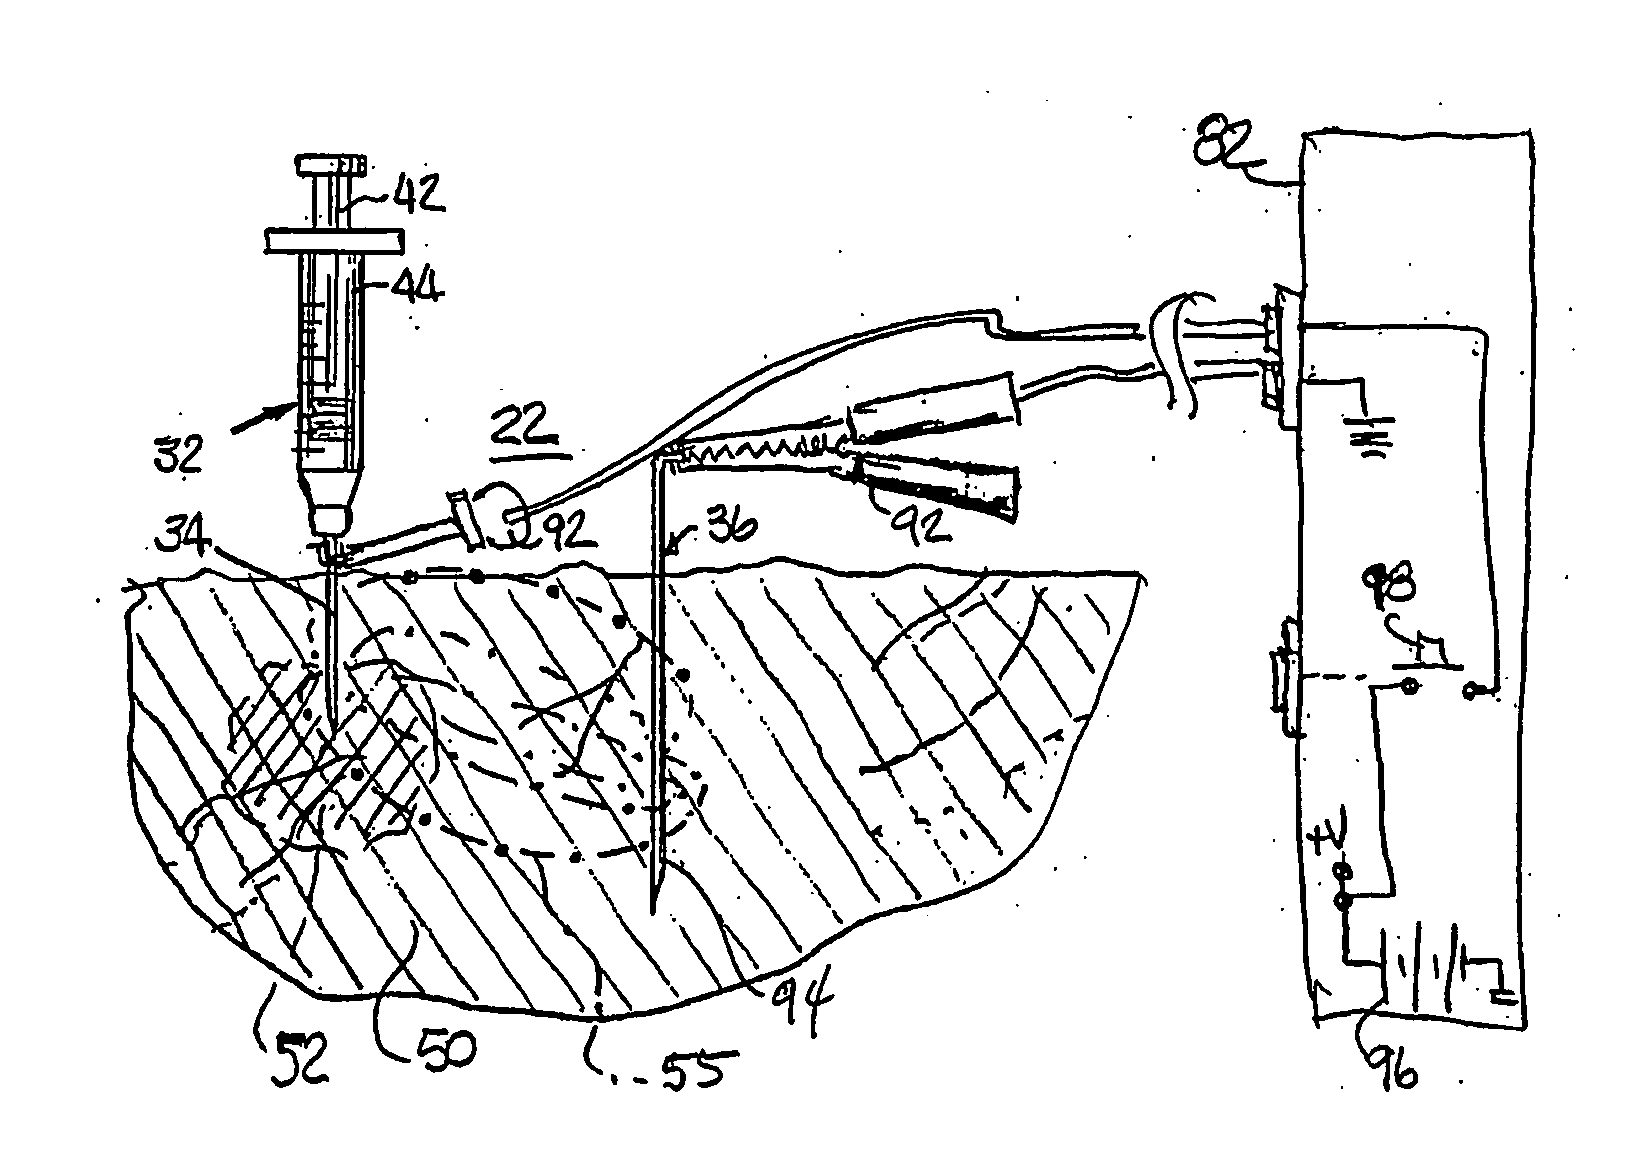 Clinical syringe with electrical stimulation aspects